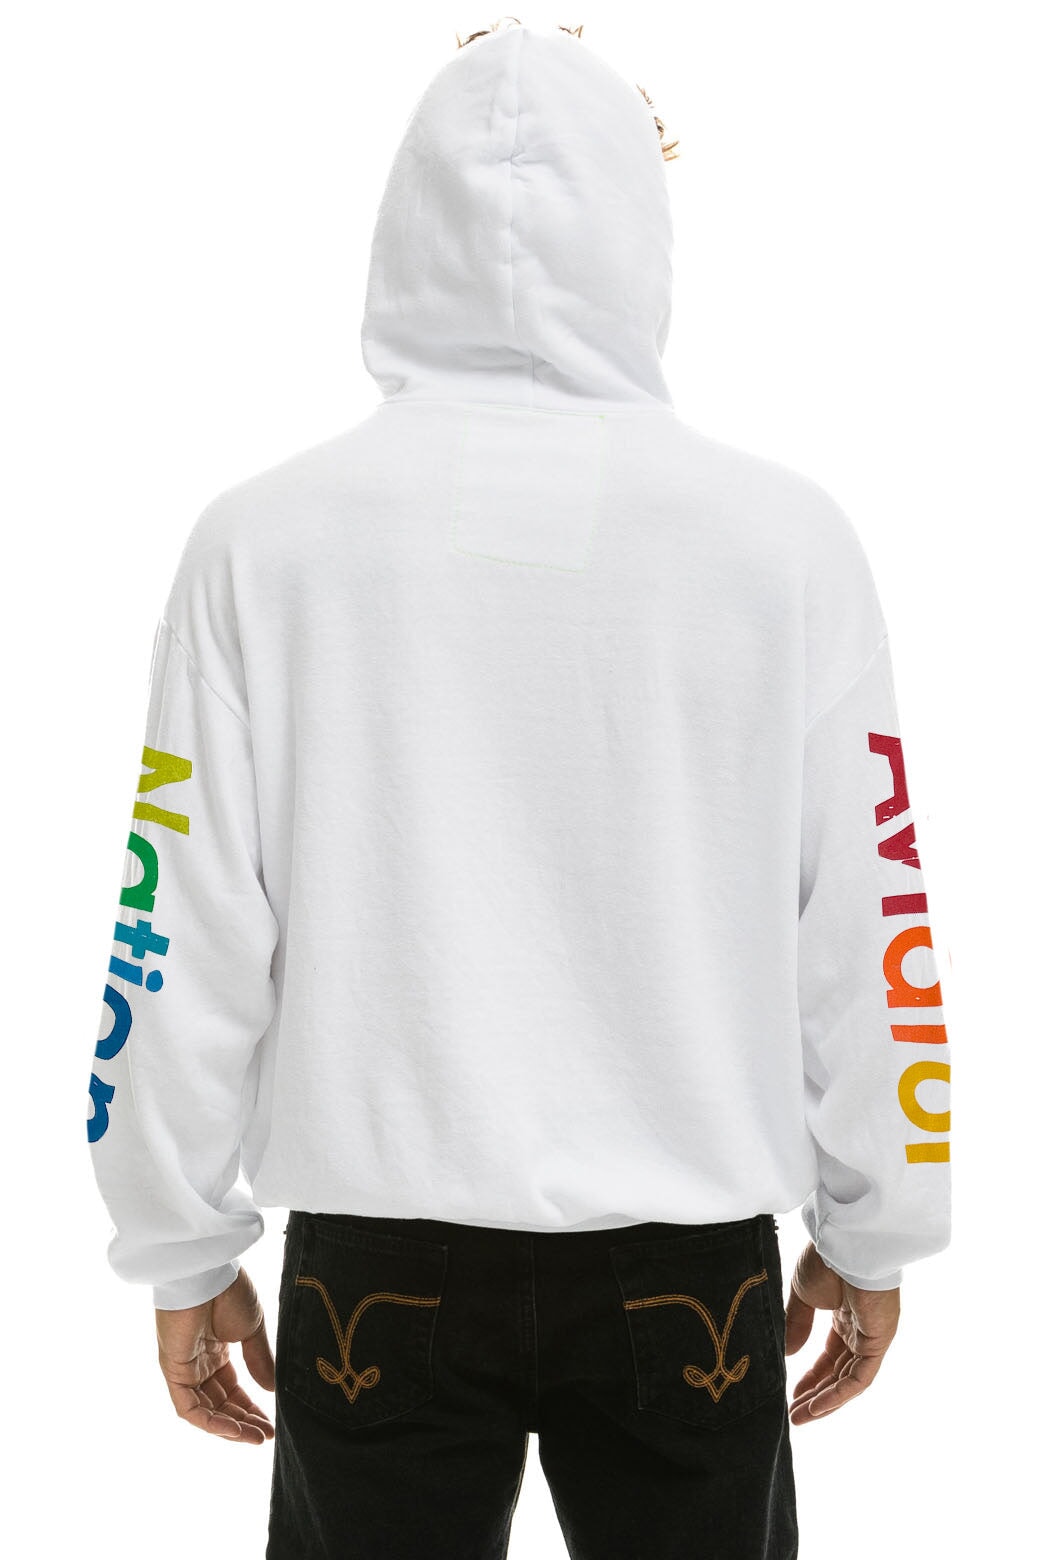 AVIATOR NATION AUSTIN RELAXED PULLOVER HOODIE - WHITE Hoodie Aviator Nation 